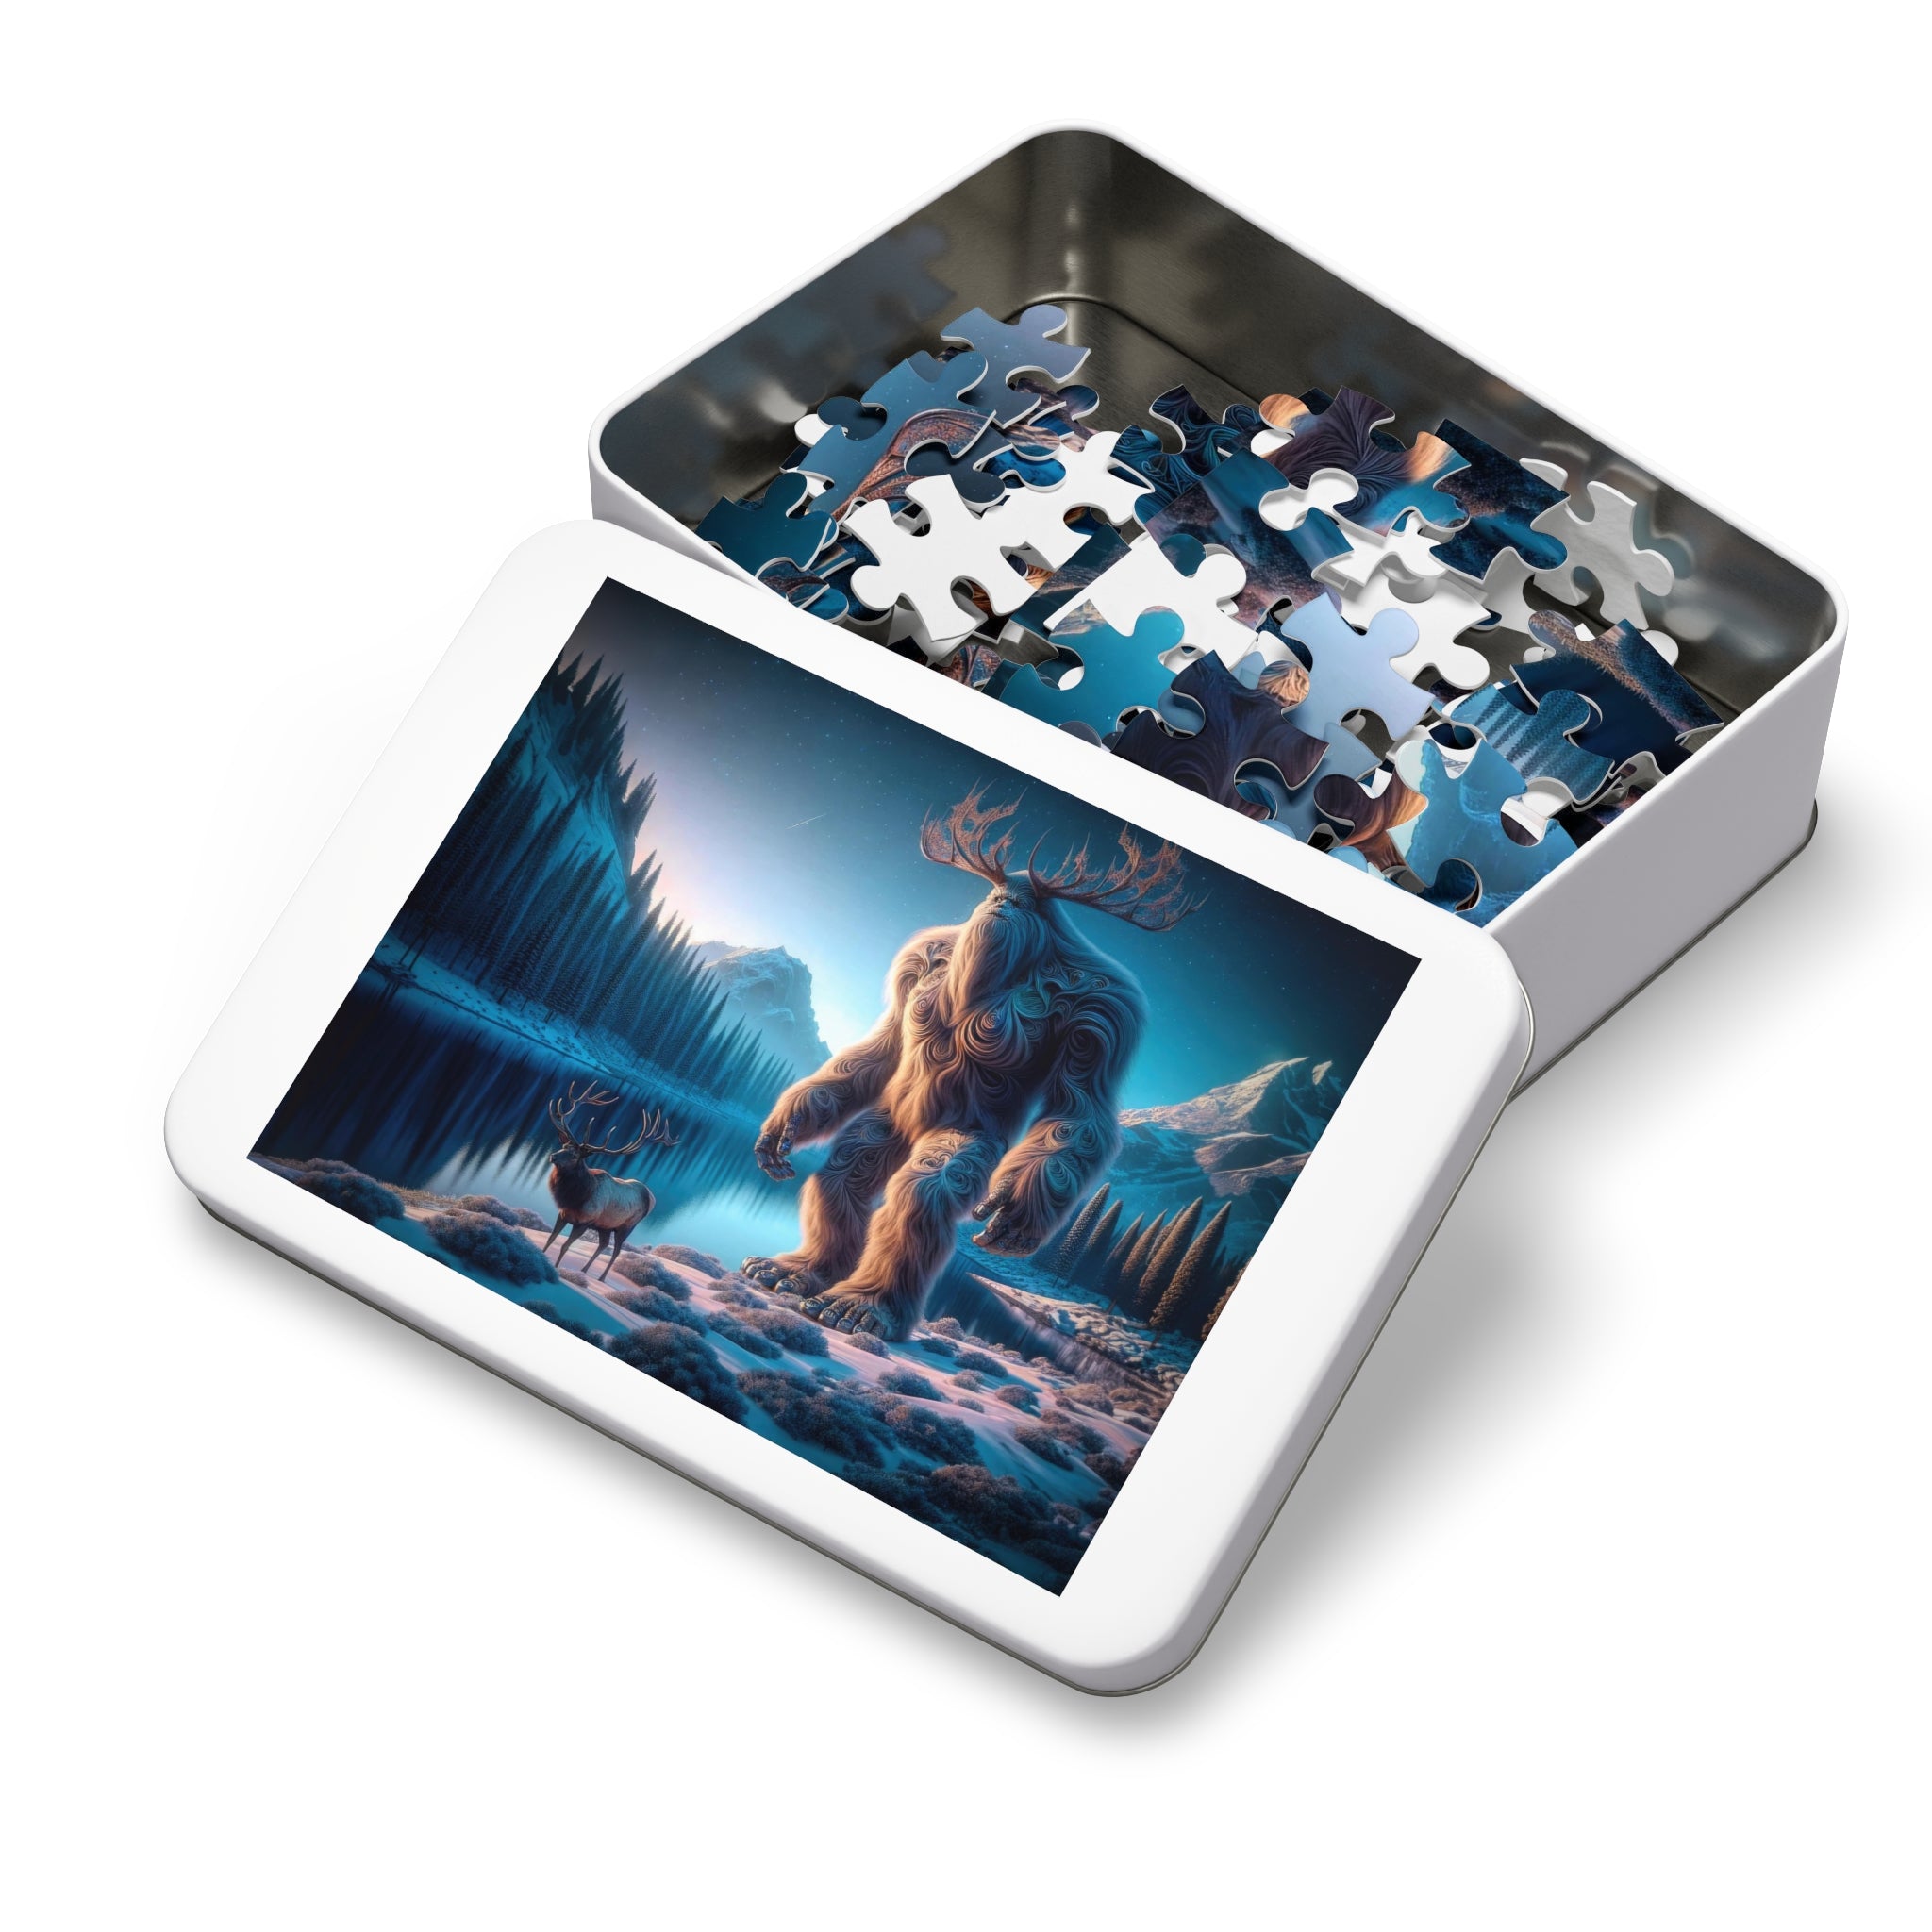 Guardian of the Glacial Groves Jigsaw Puzzle